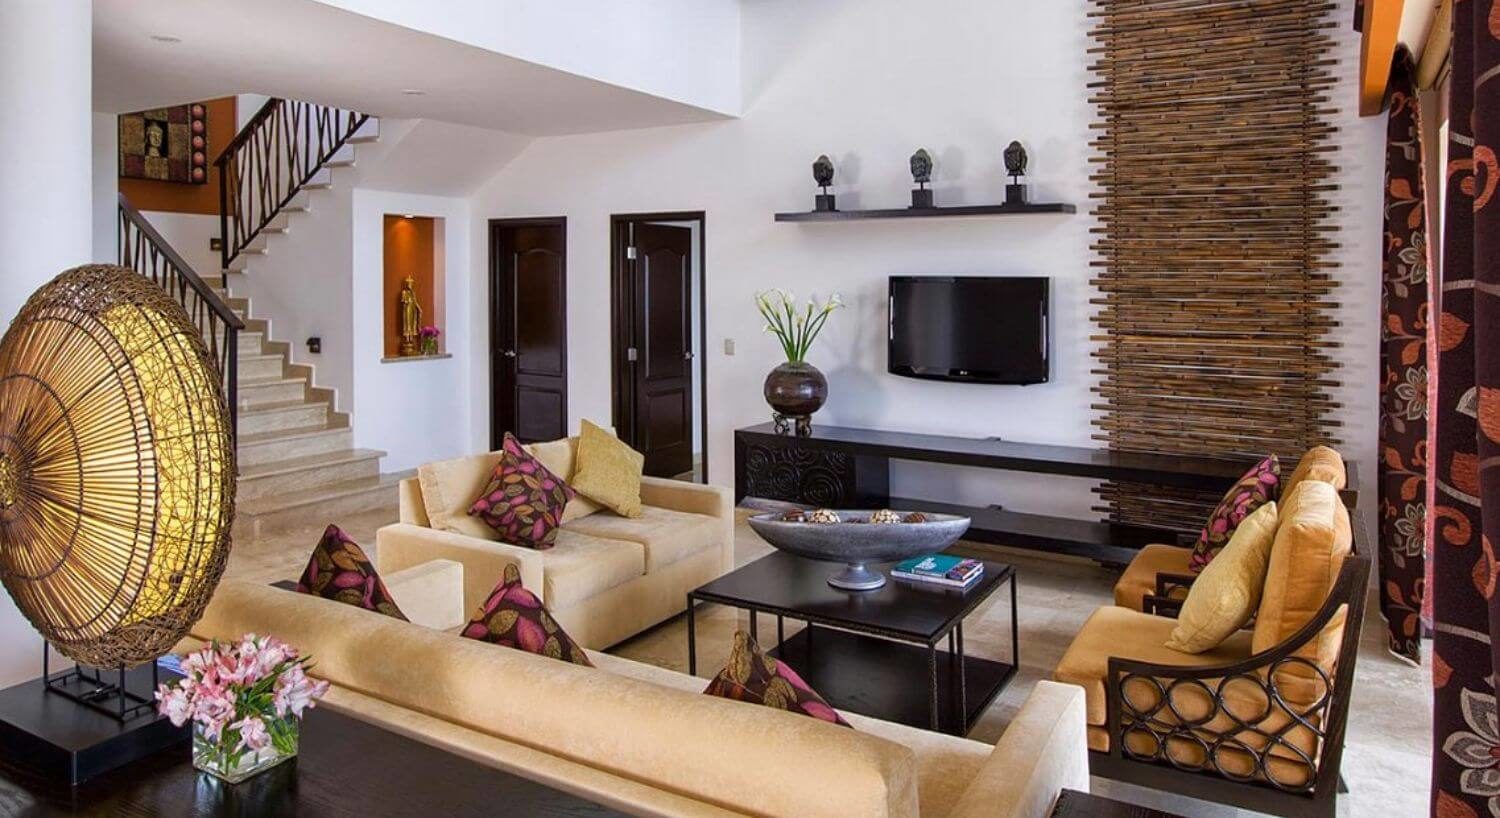 A comfortable living room with tan sofas and chairs, a coffee table and sideboard, a flat screen TV on one wall, and stairs leading up to a second floor.